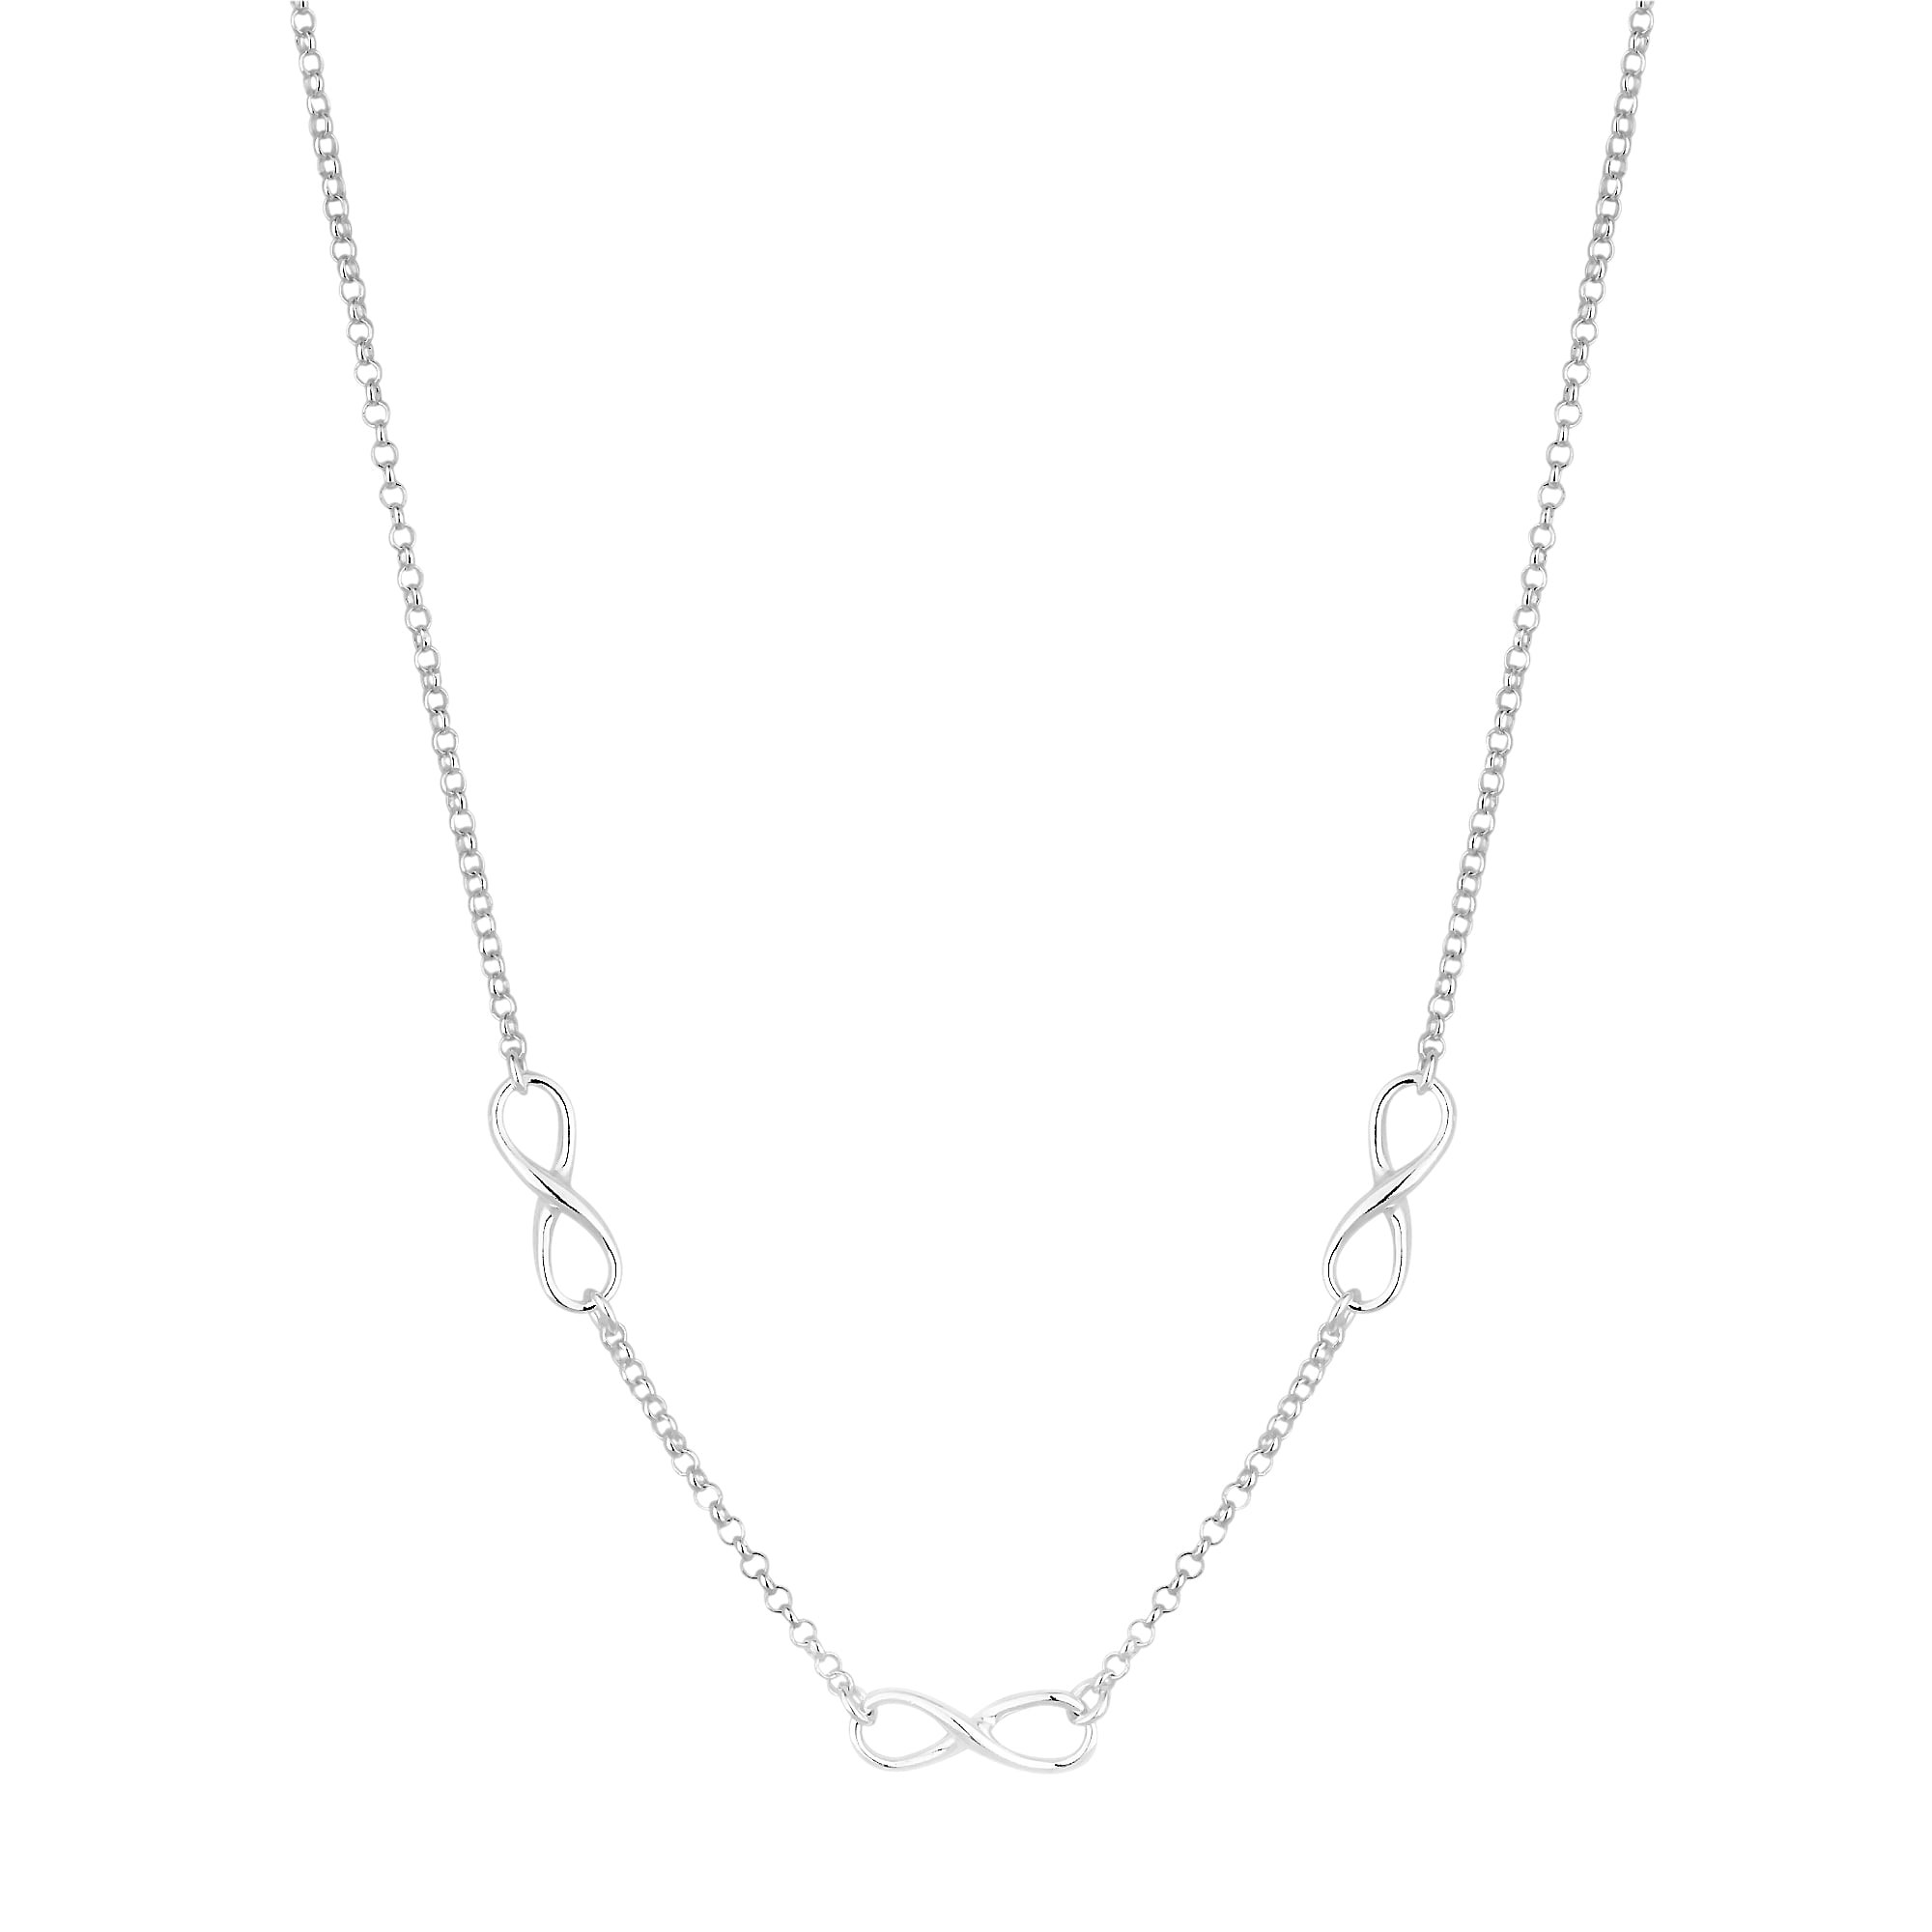 Sterling Silver Infinity Necklace
 Simply Silver Sterling Silver 925 Infinity Necklace Sale